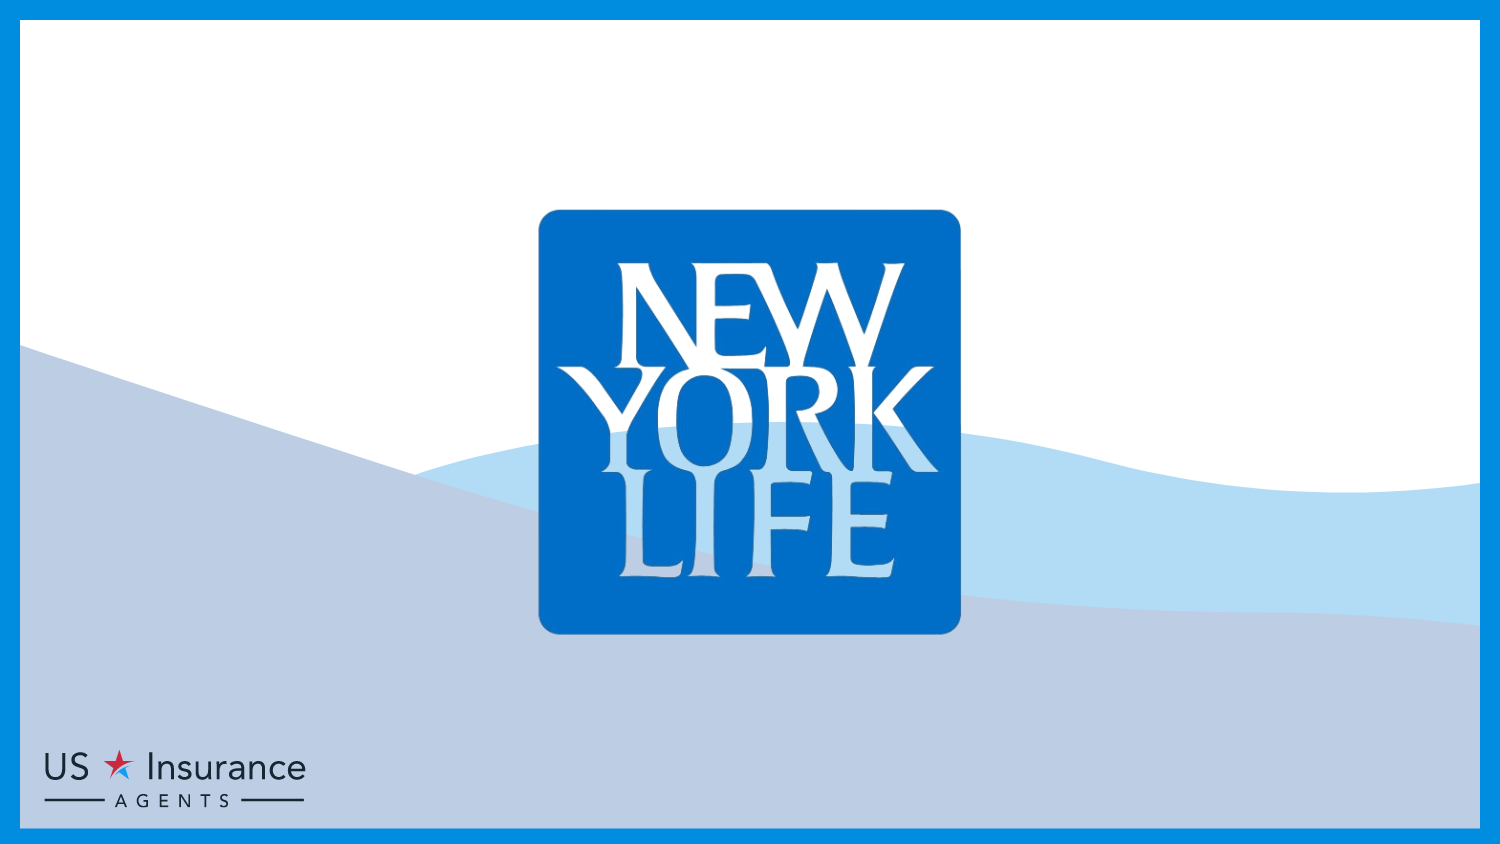 New York Life: Best Life Insurance for a Child’s Father